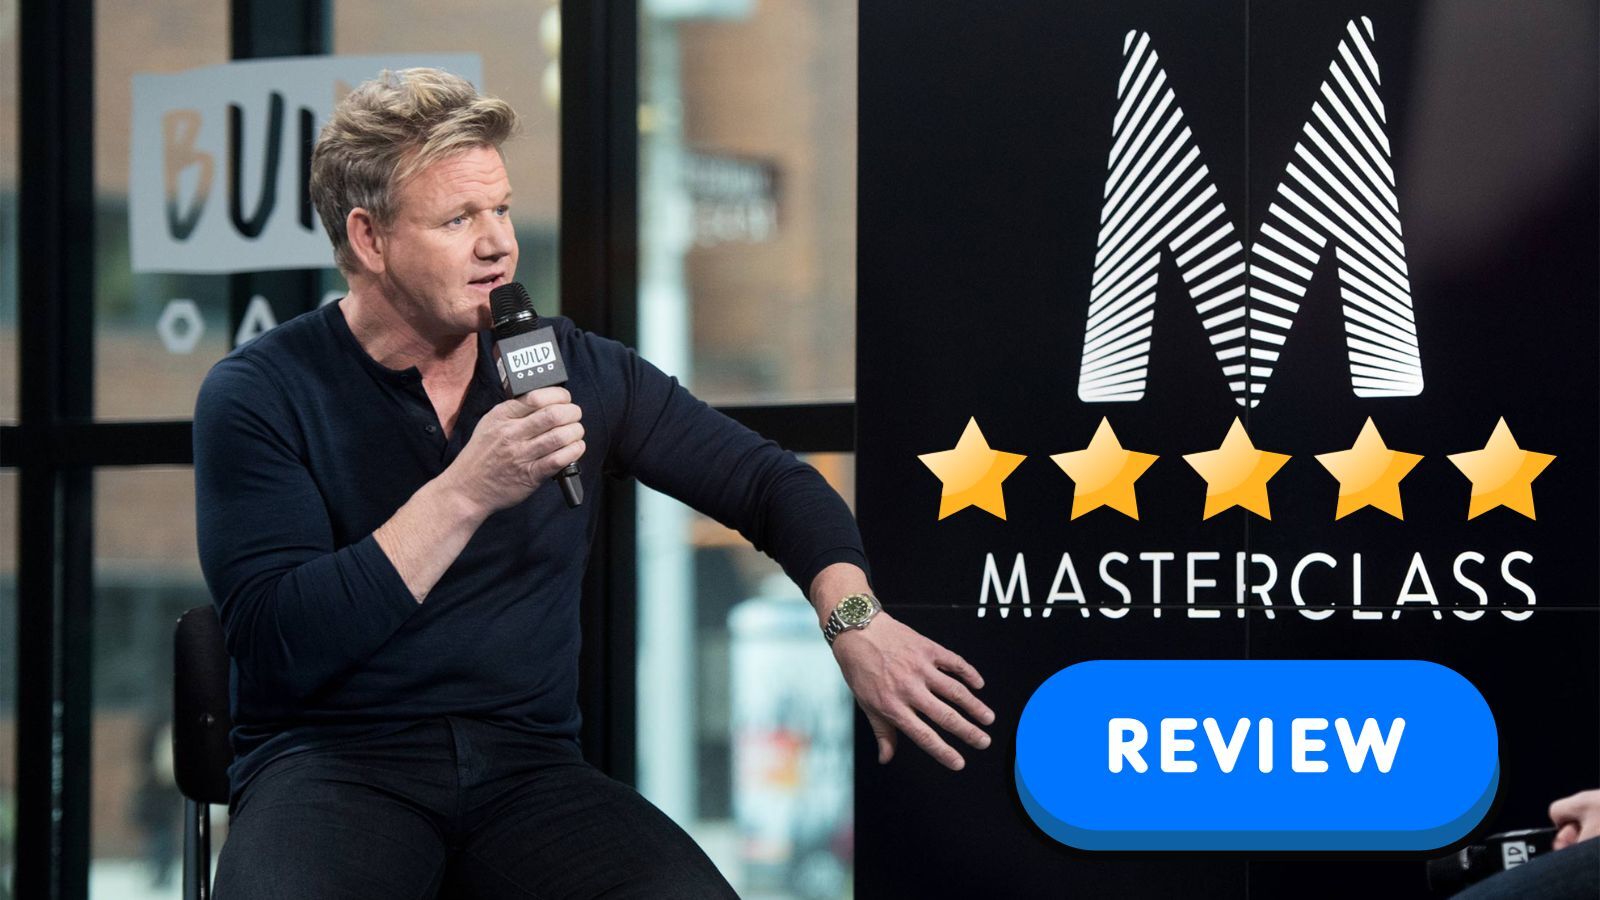 Gordon Ramsay Masterclass Review:  Can It Really Help You Improve Your Cooking Skills?